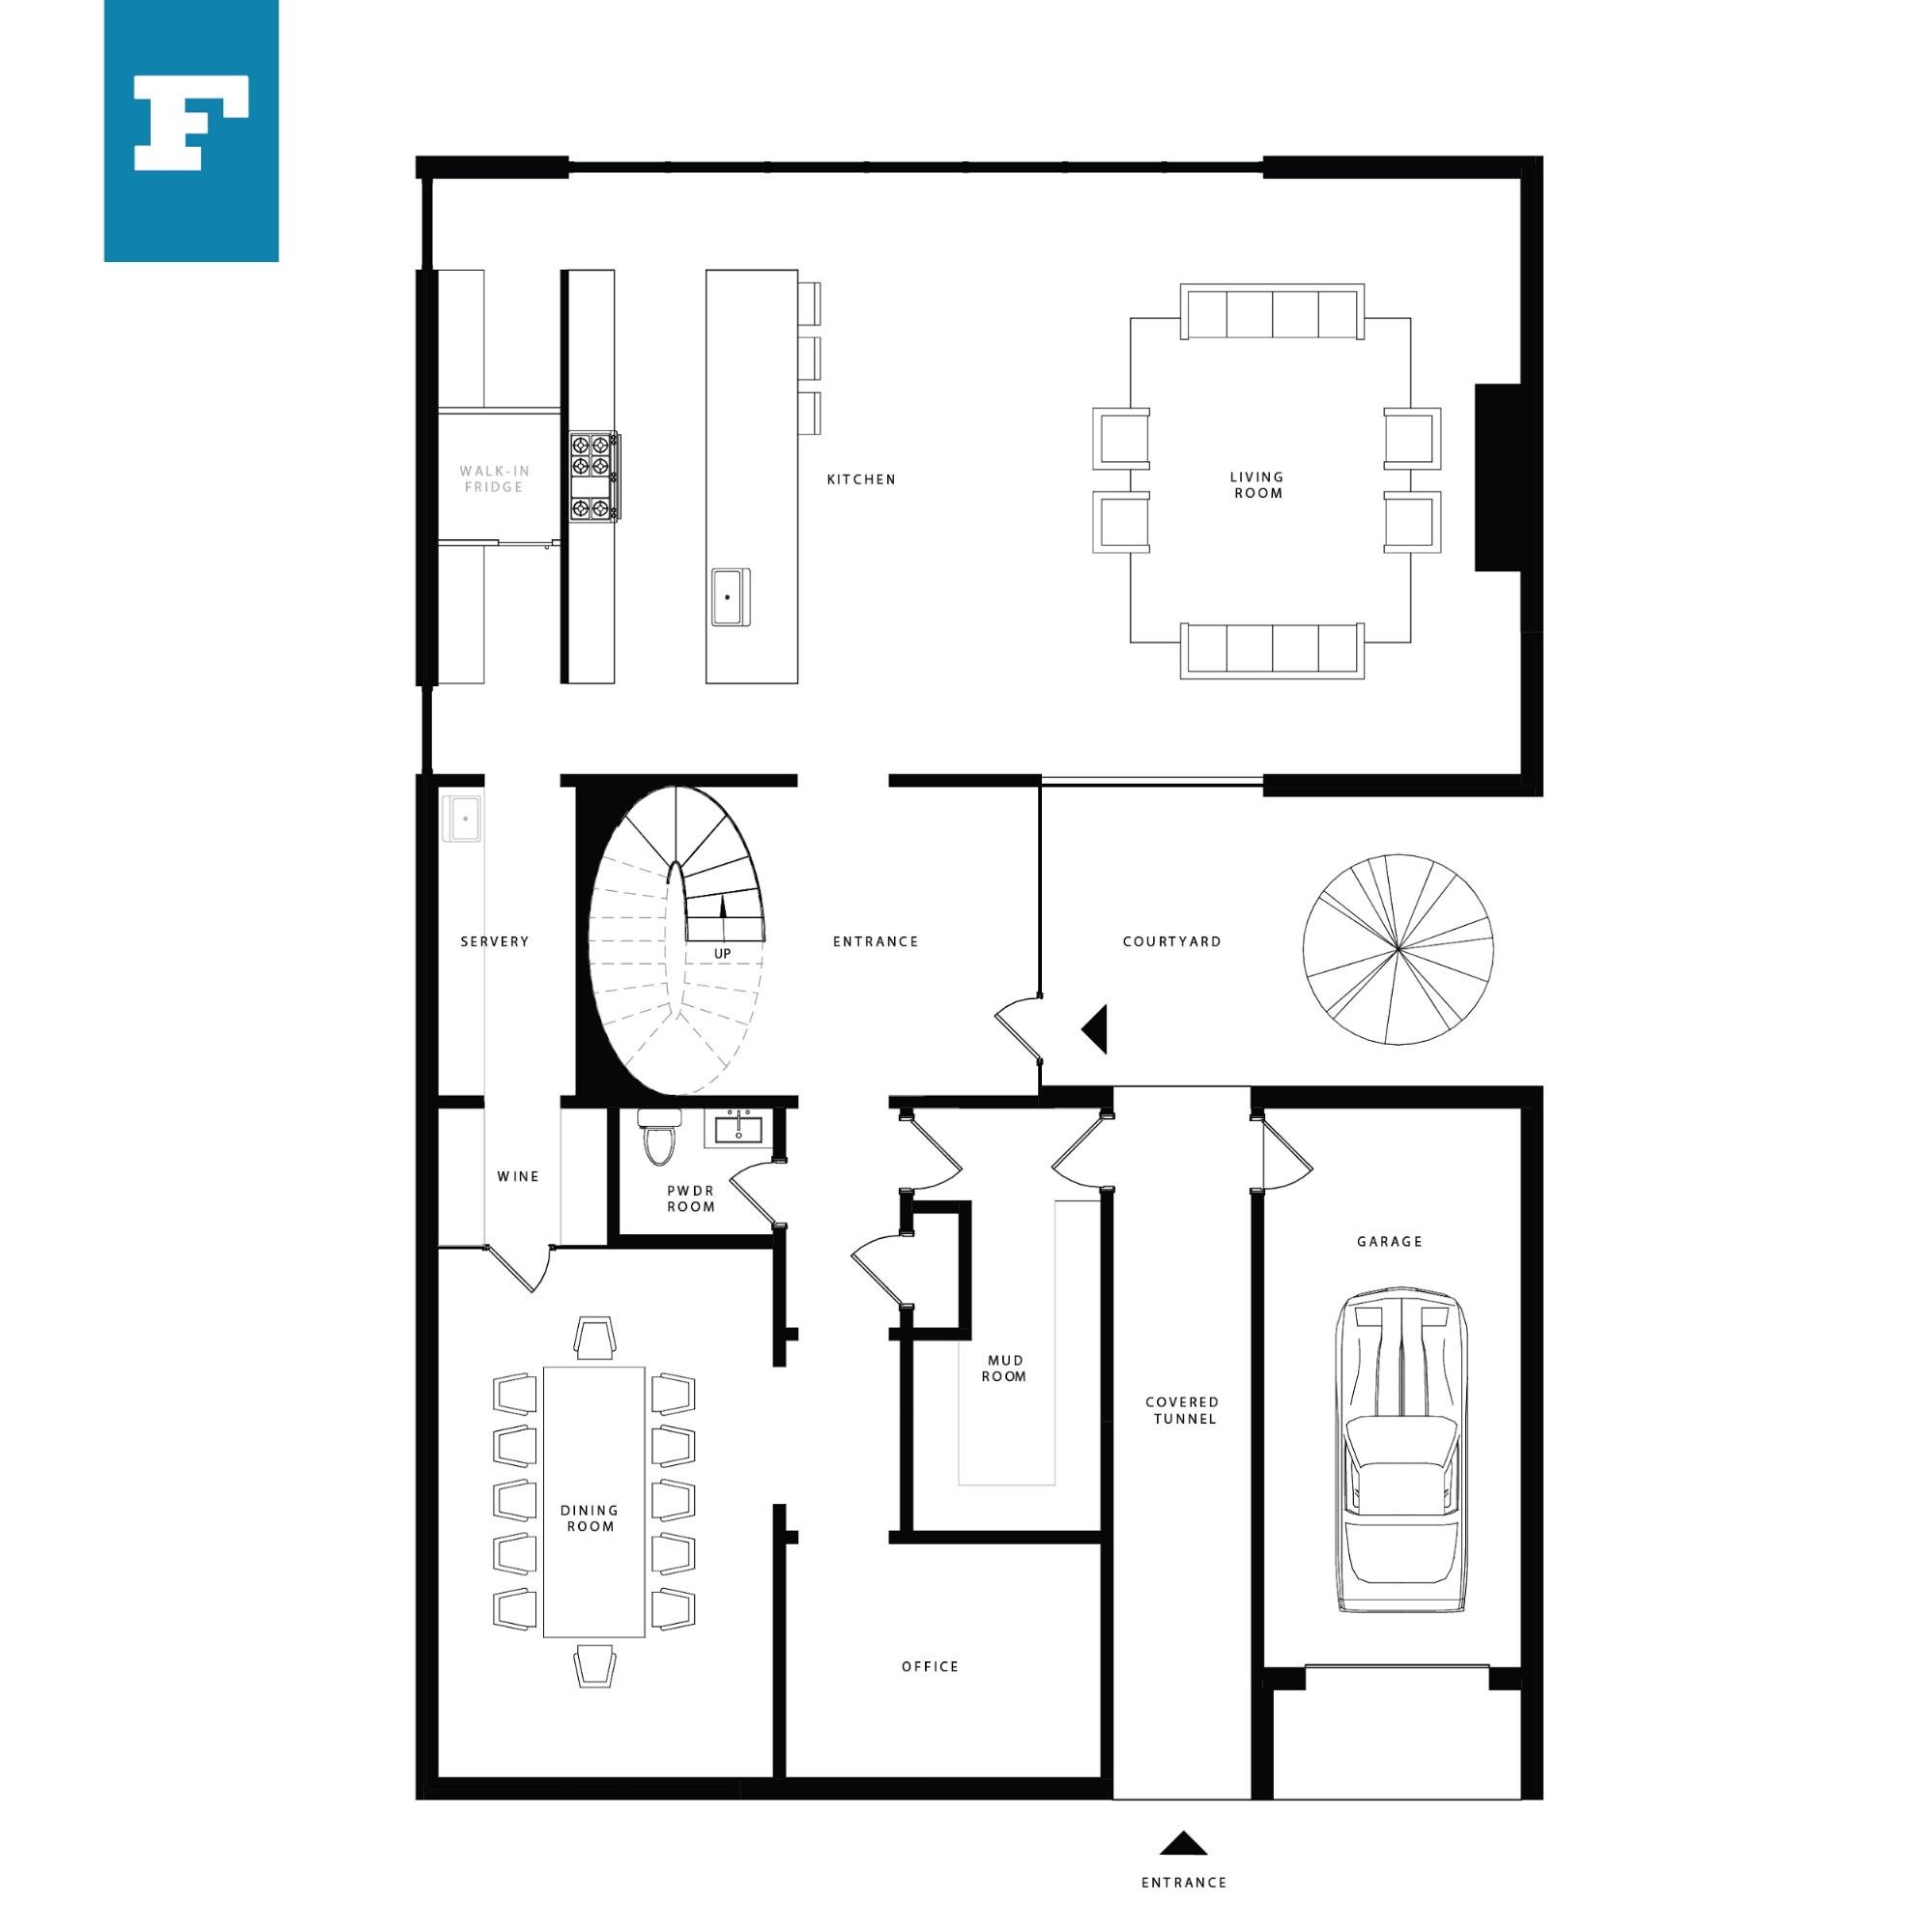 The floor plan of a courtyard house designed by FrankFranco Architects.